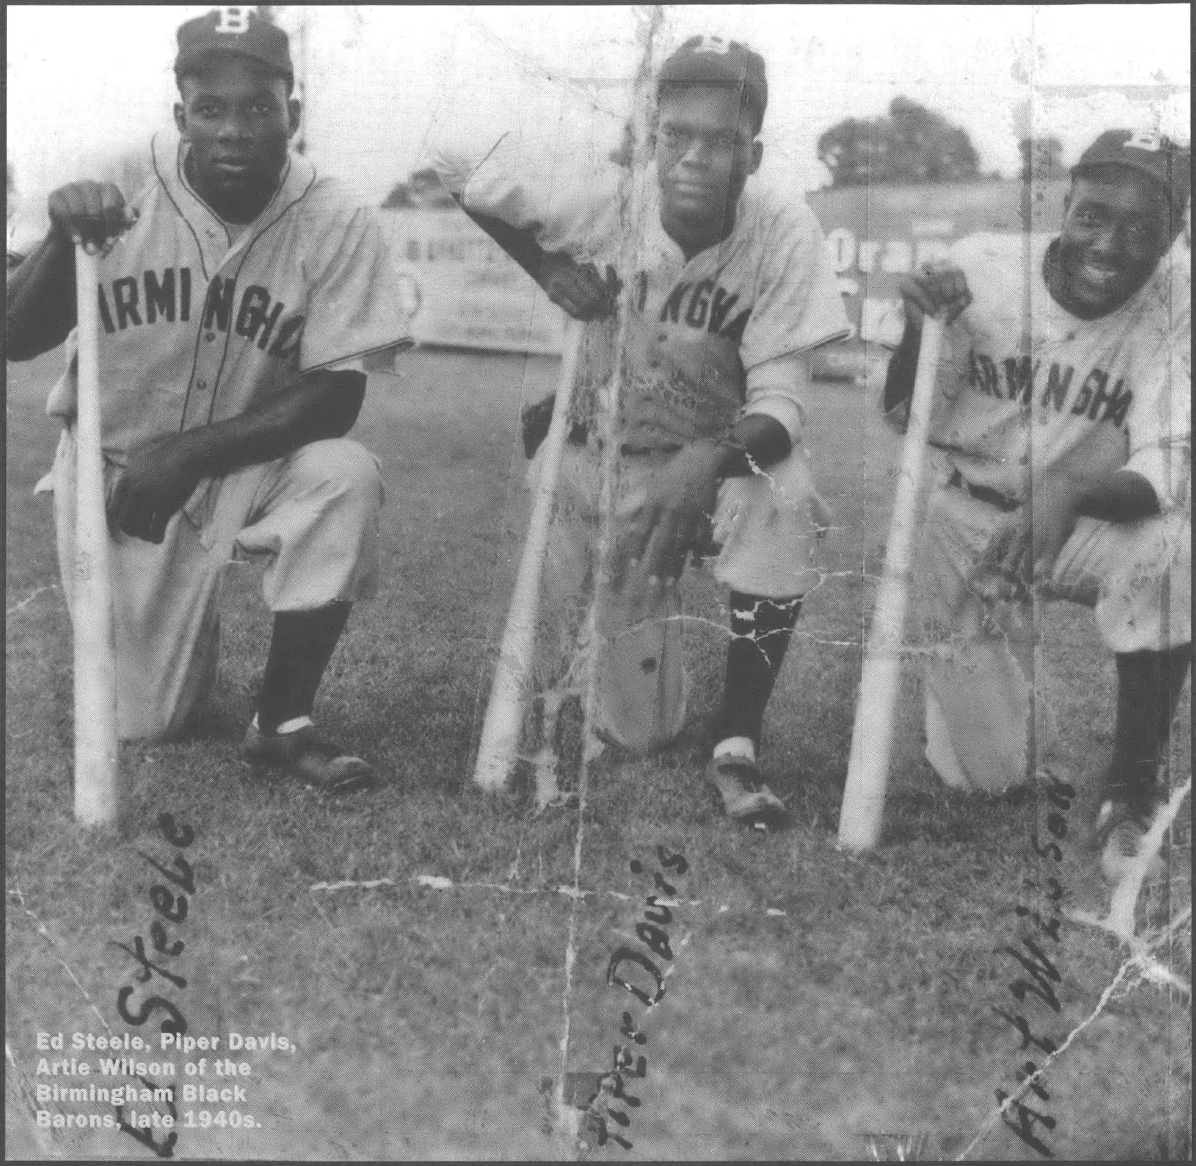 Old photo of three Black baseball players in uniform kneeling with bats